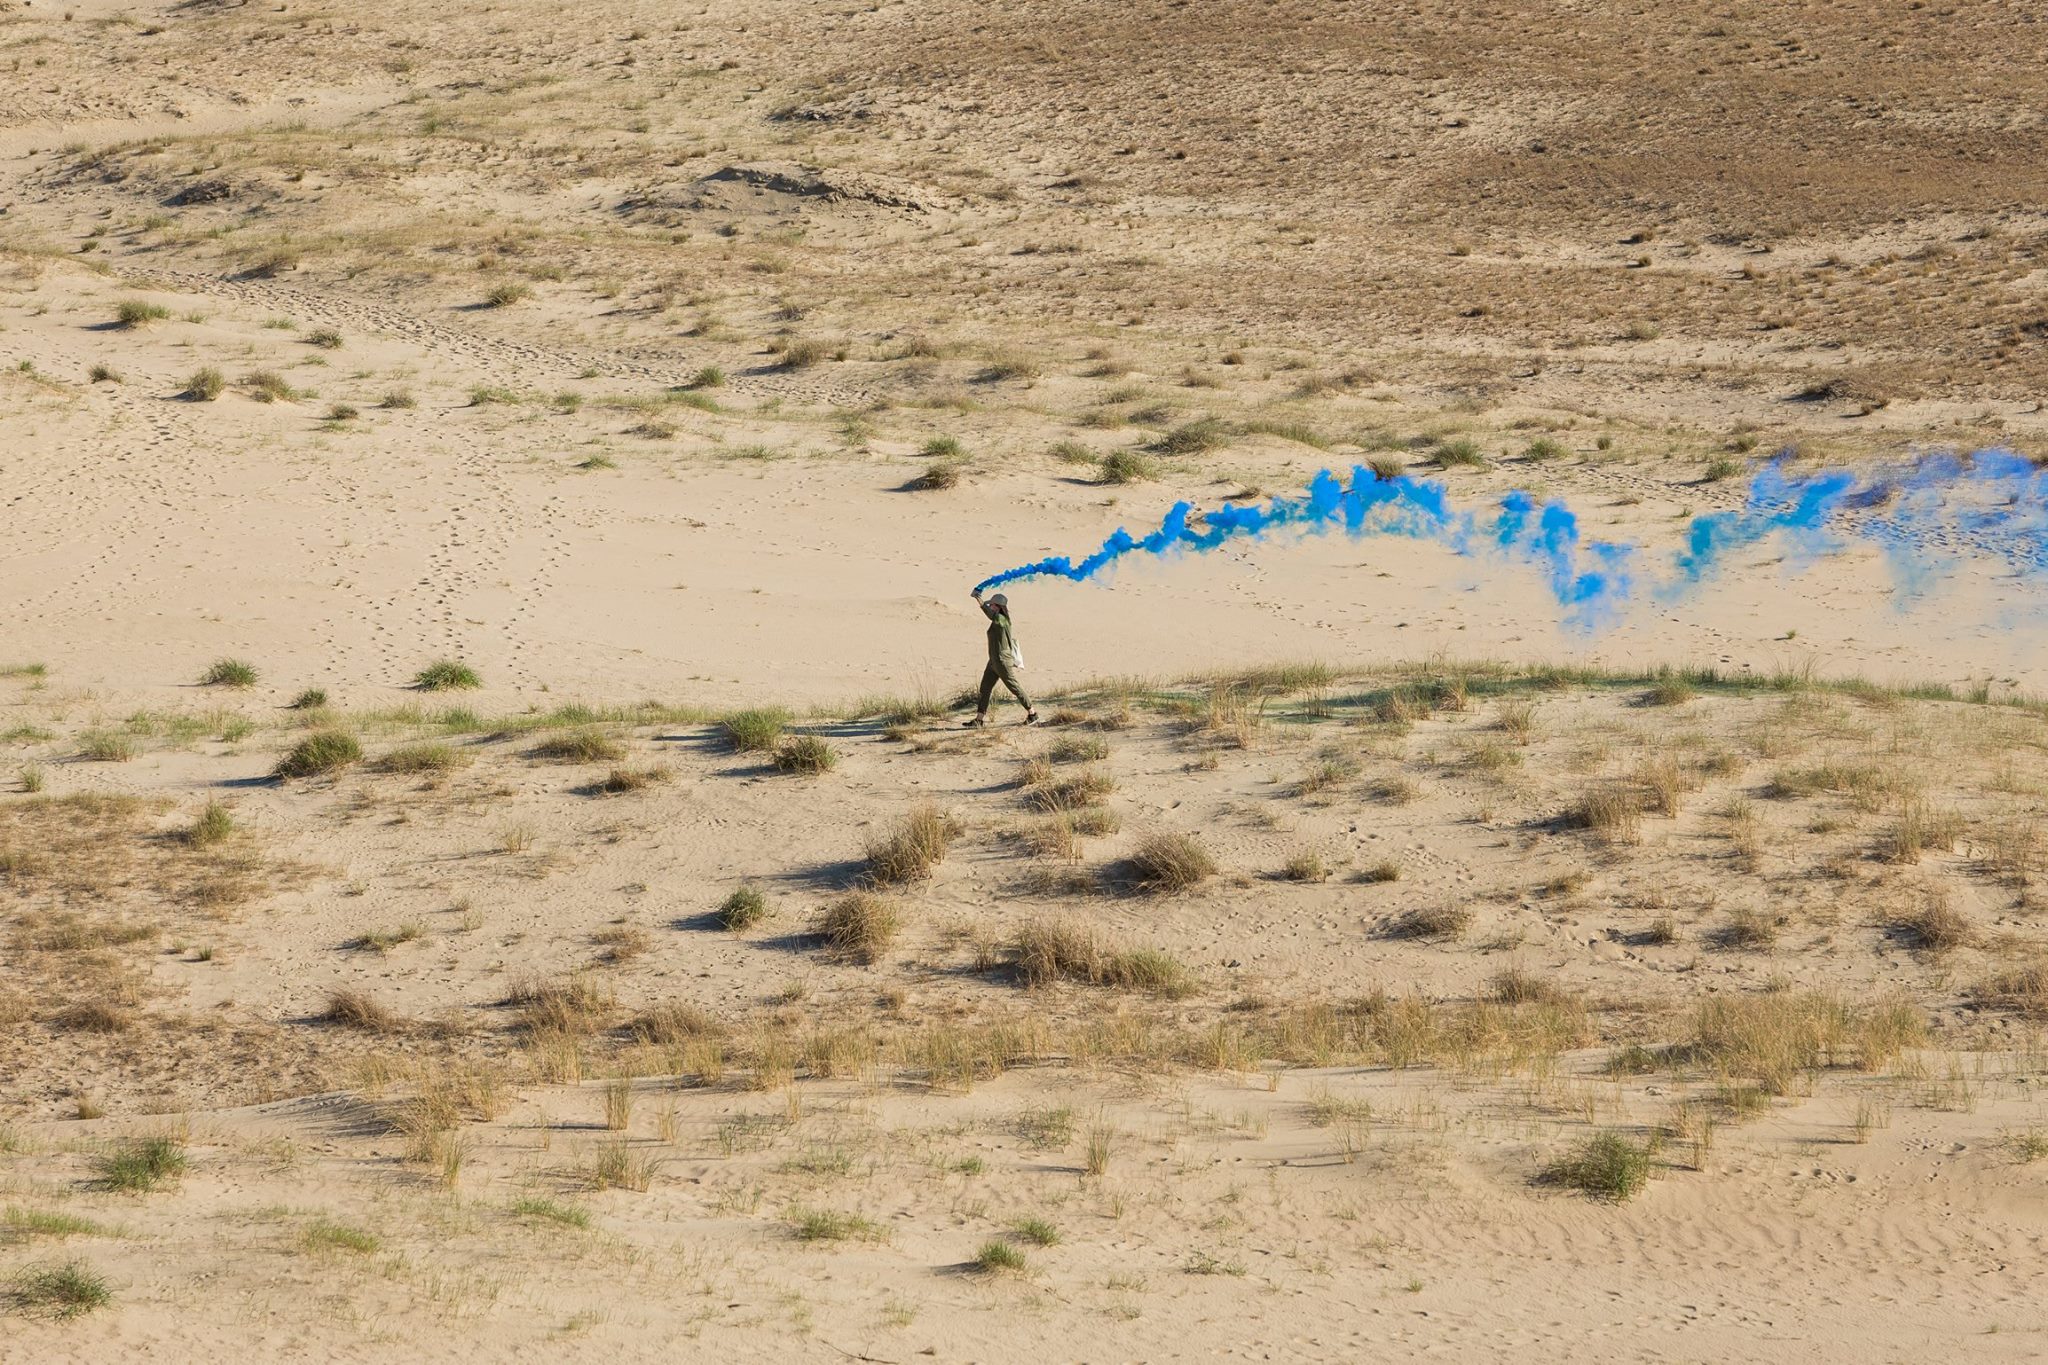 Still from performance of smoke walk, Nida, Lithuania. The artist walks across a sand dune landscape with a blue smoke fare describing the path already walked